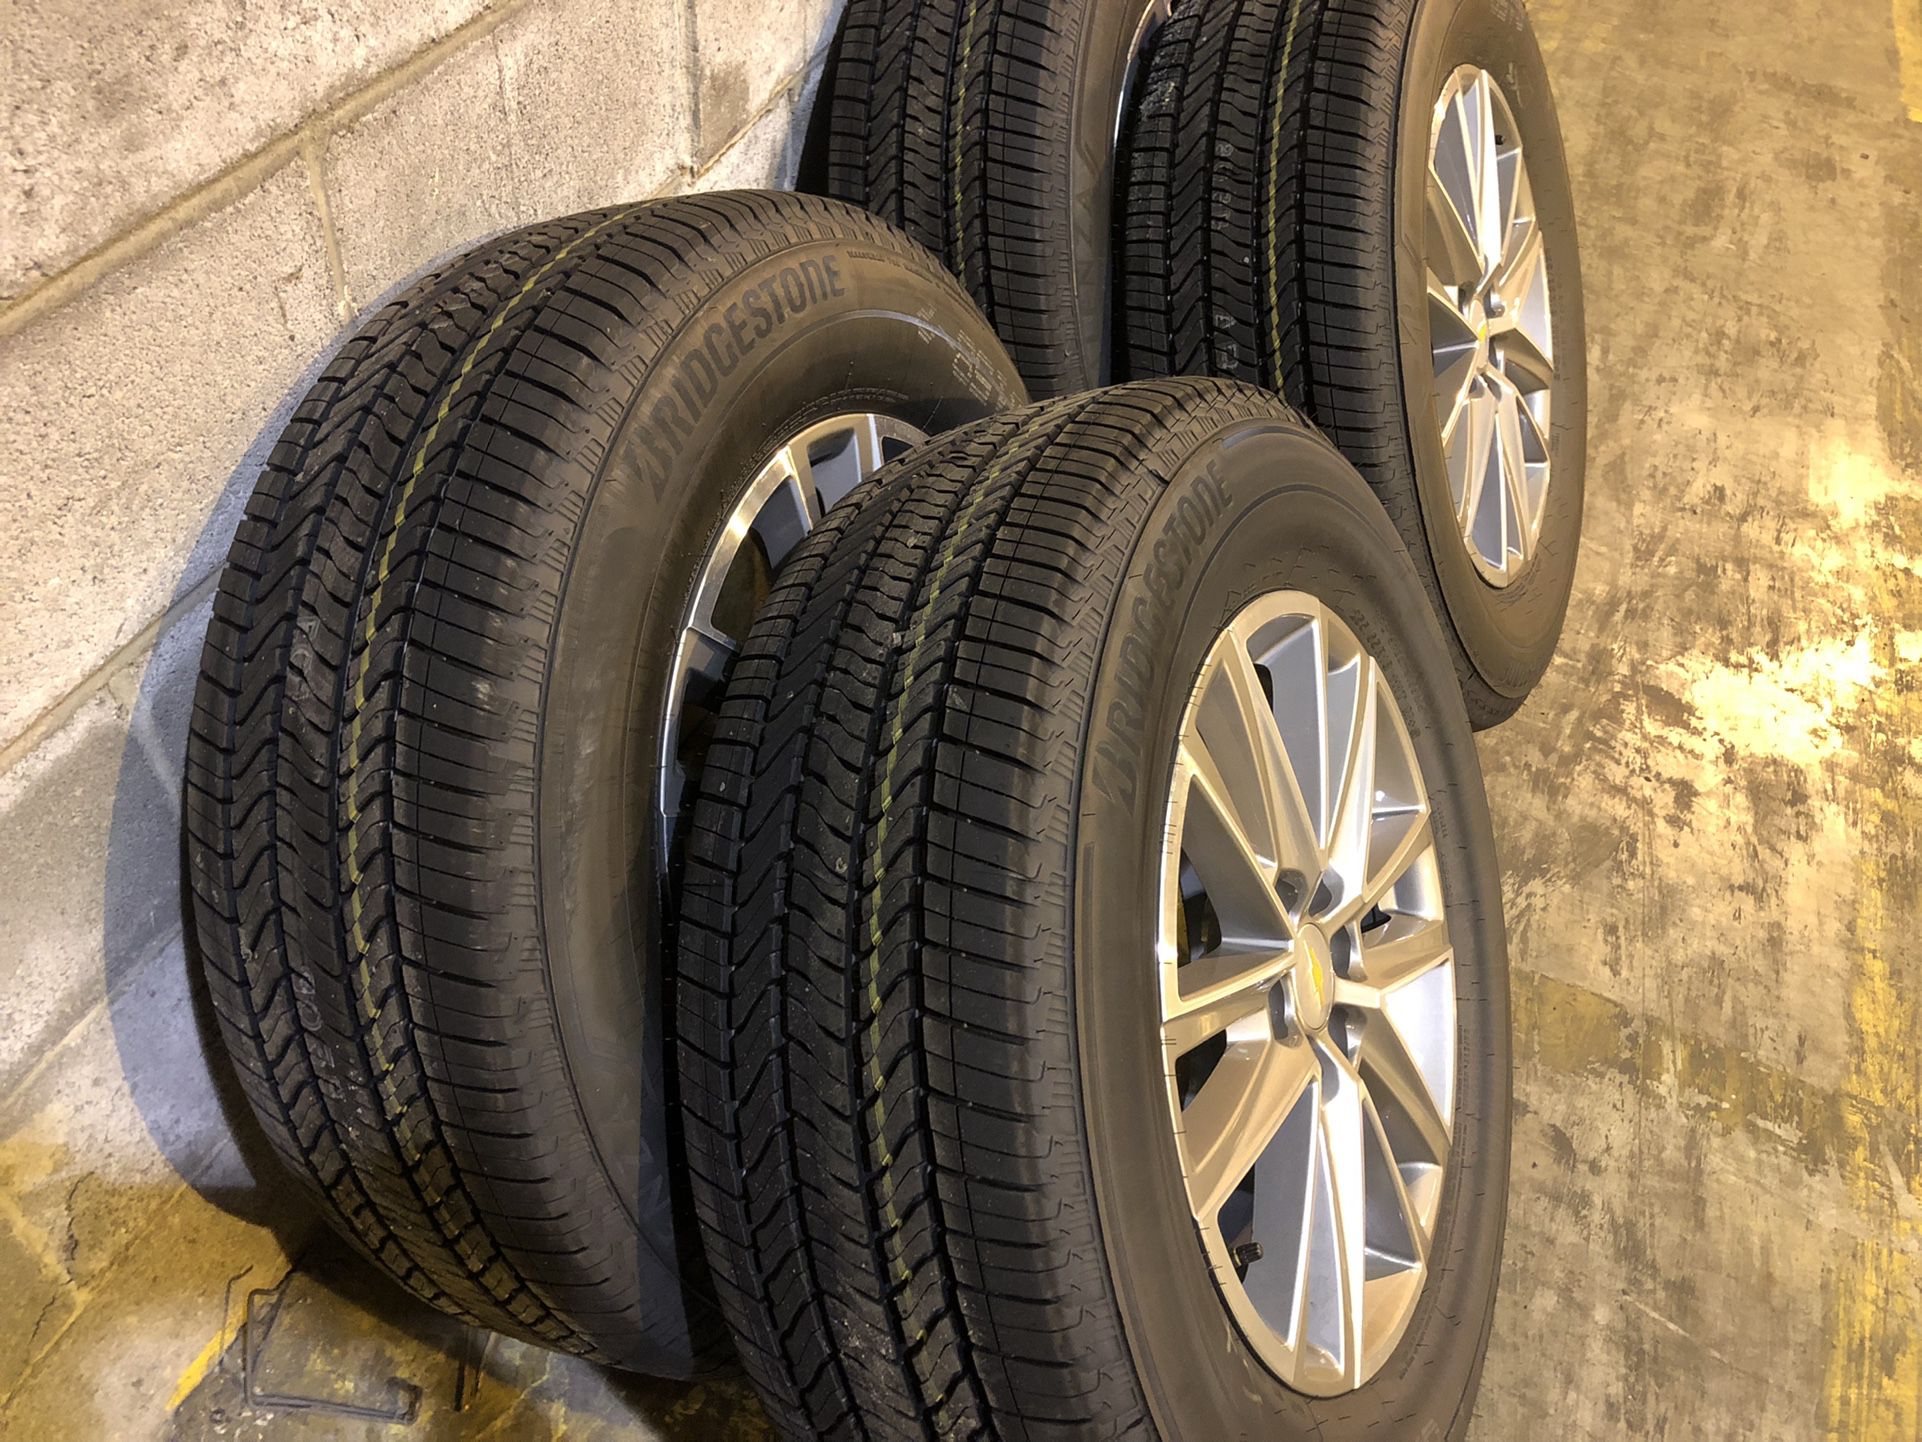 New Chevrolet Wheels And Tires - Chevy Traverse Wheels